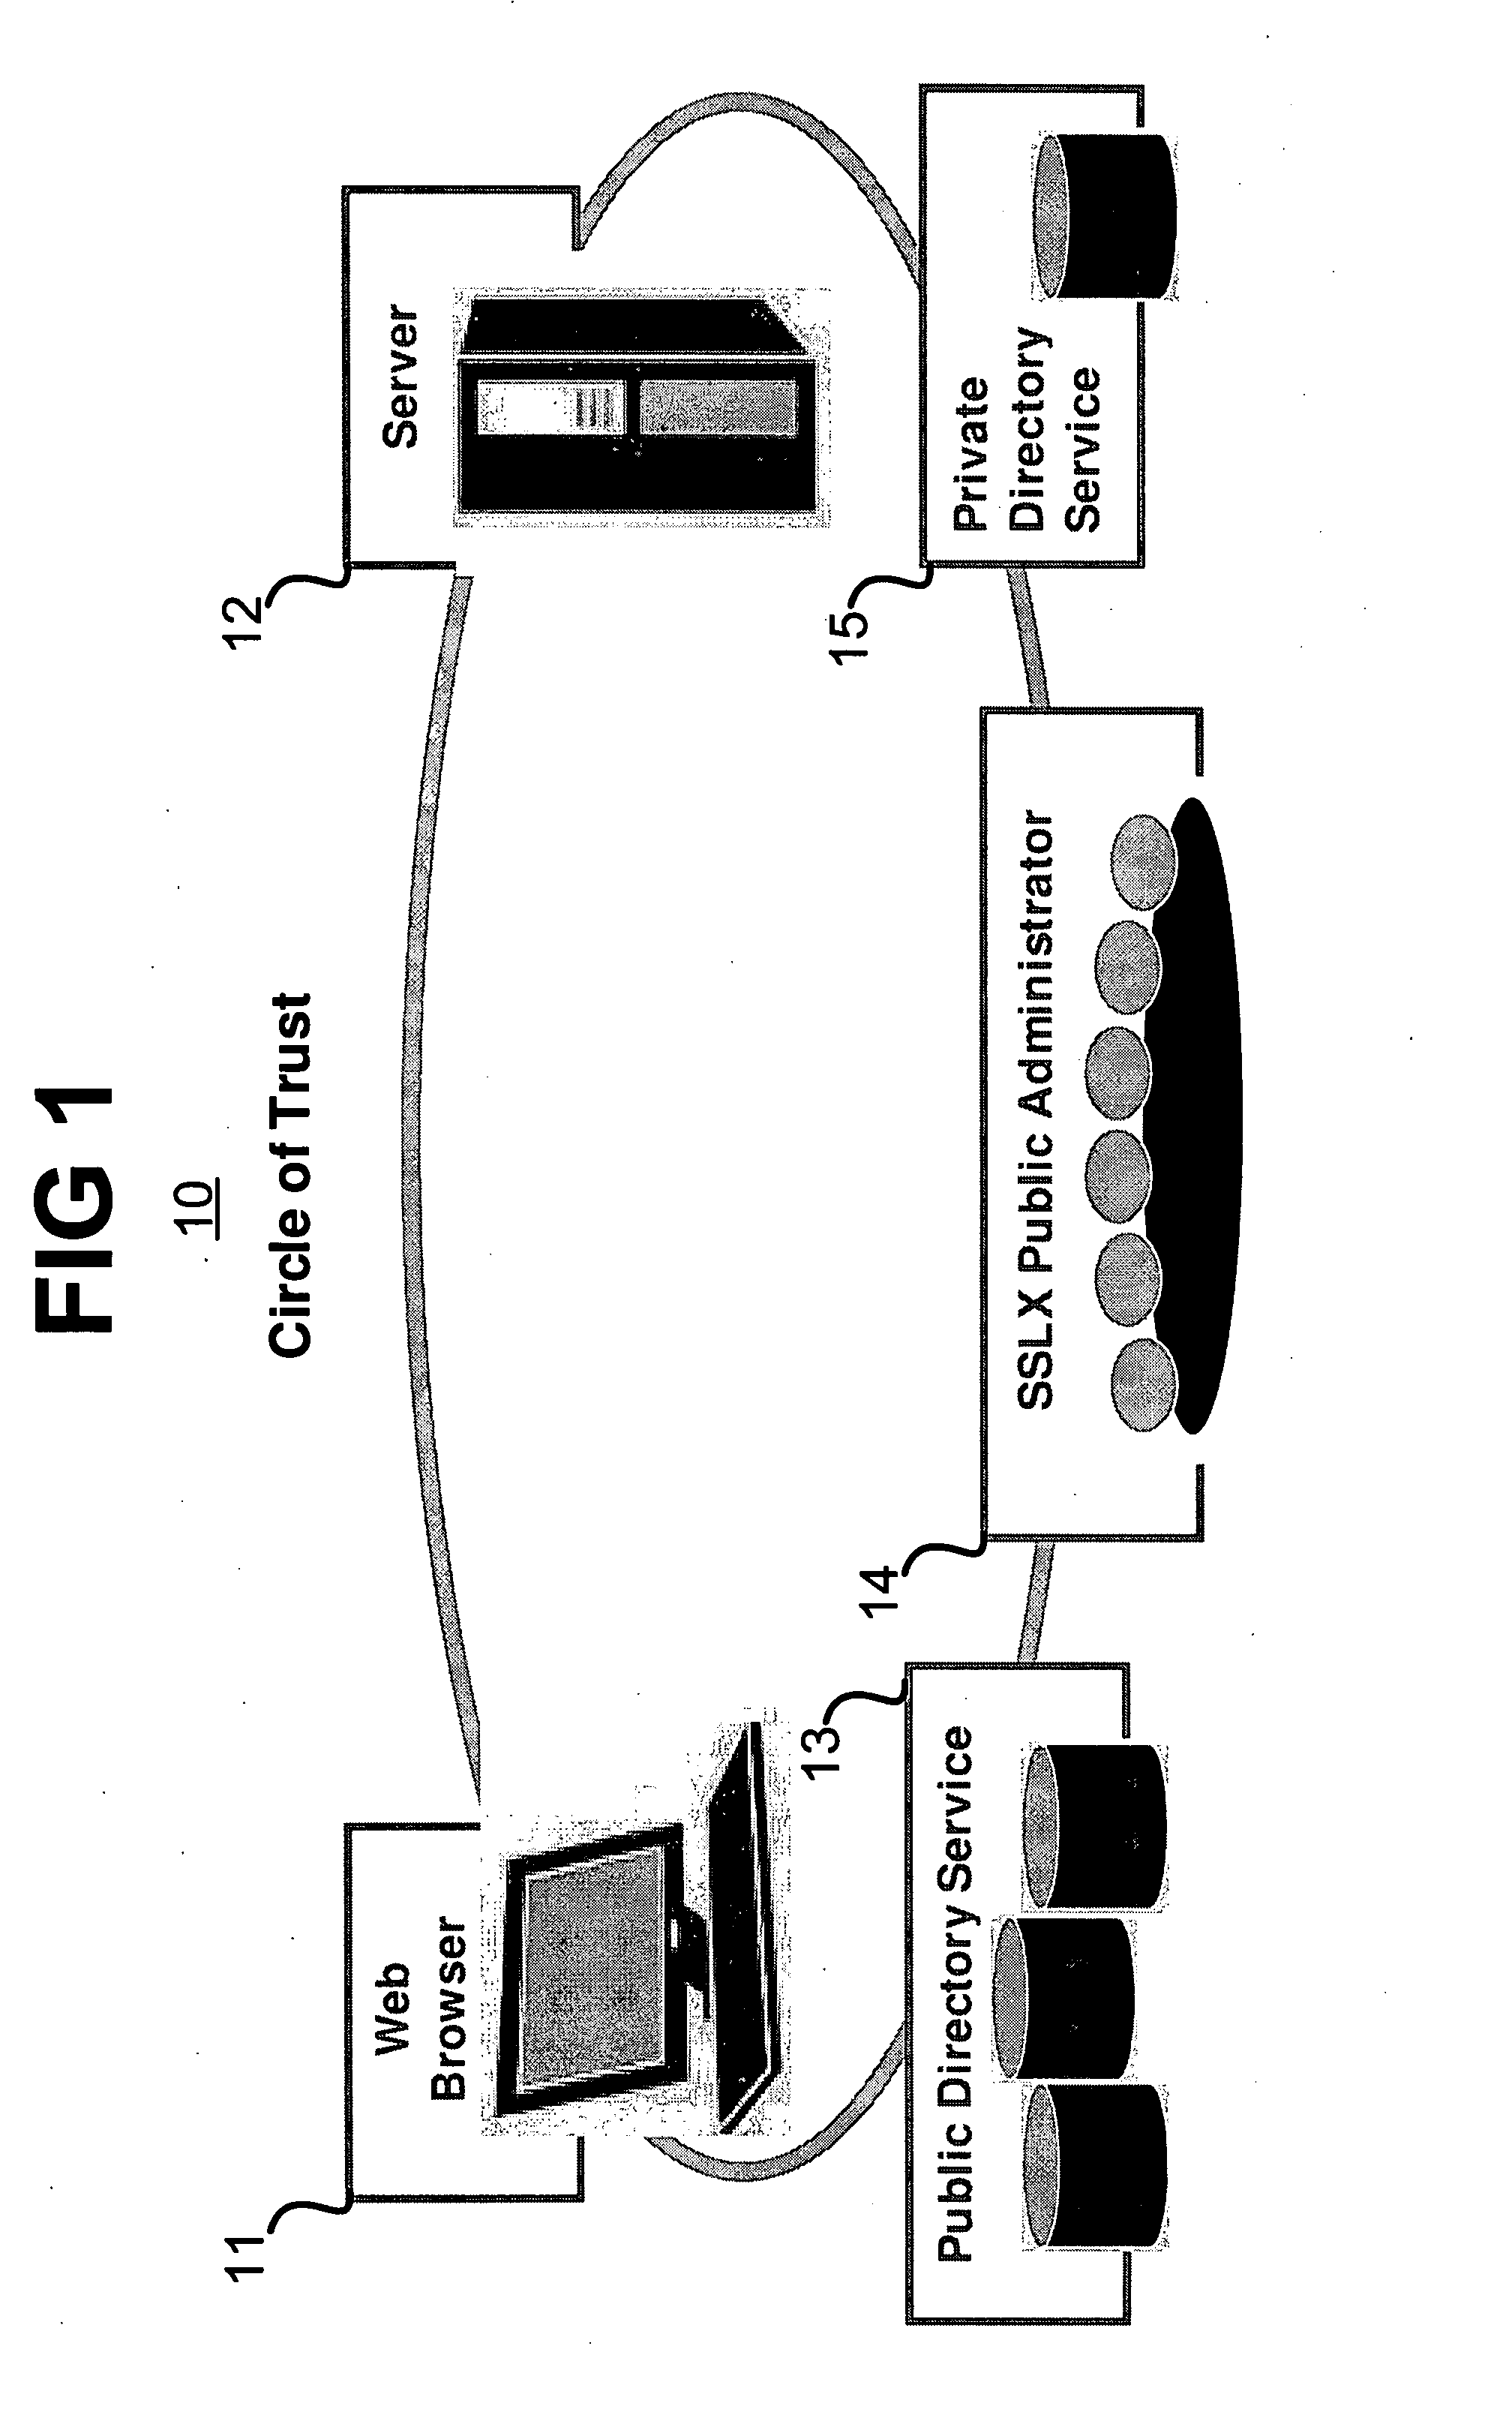 Method and system for providing authentication service for Internet users